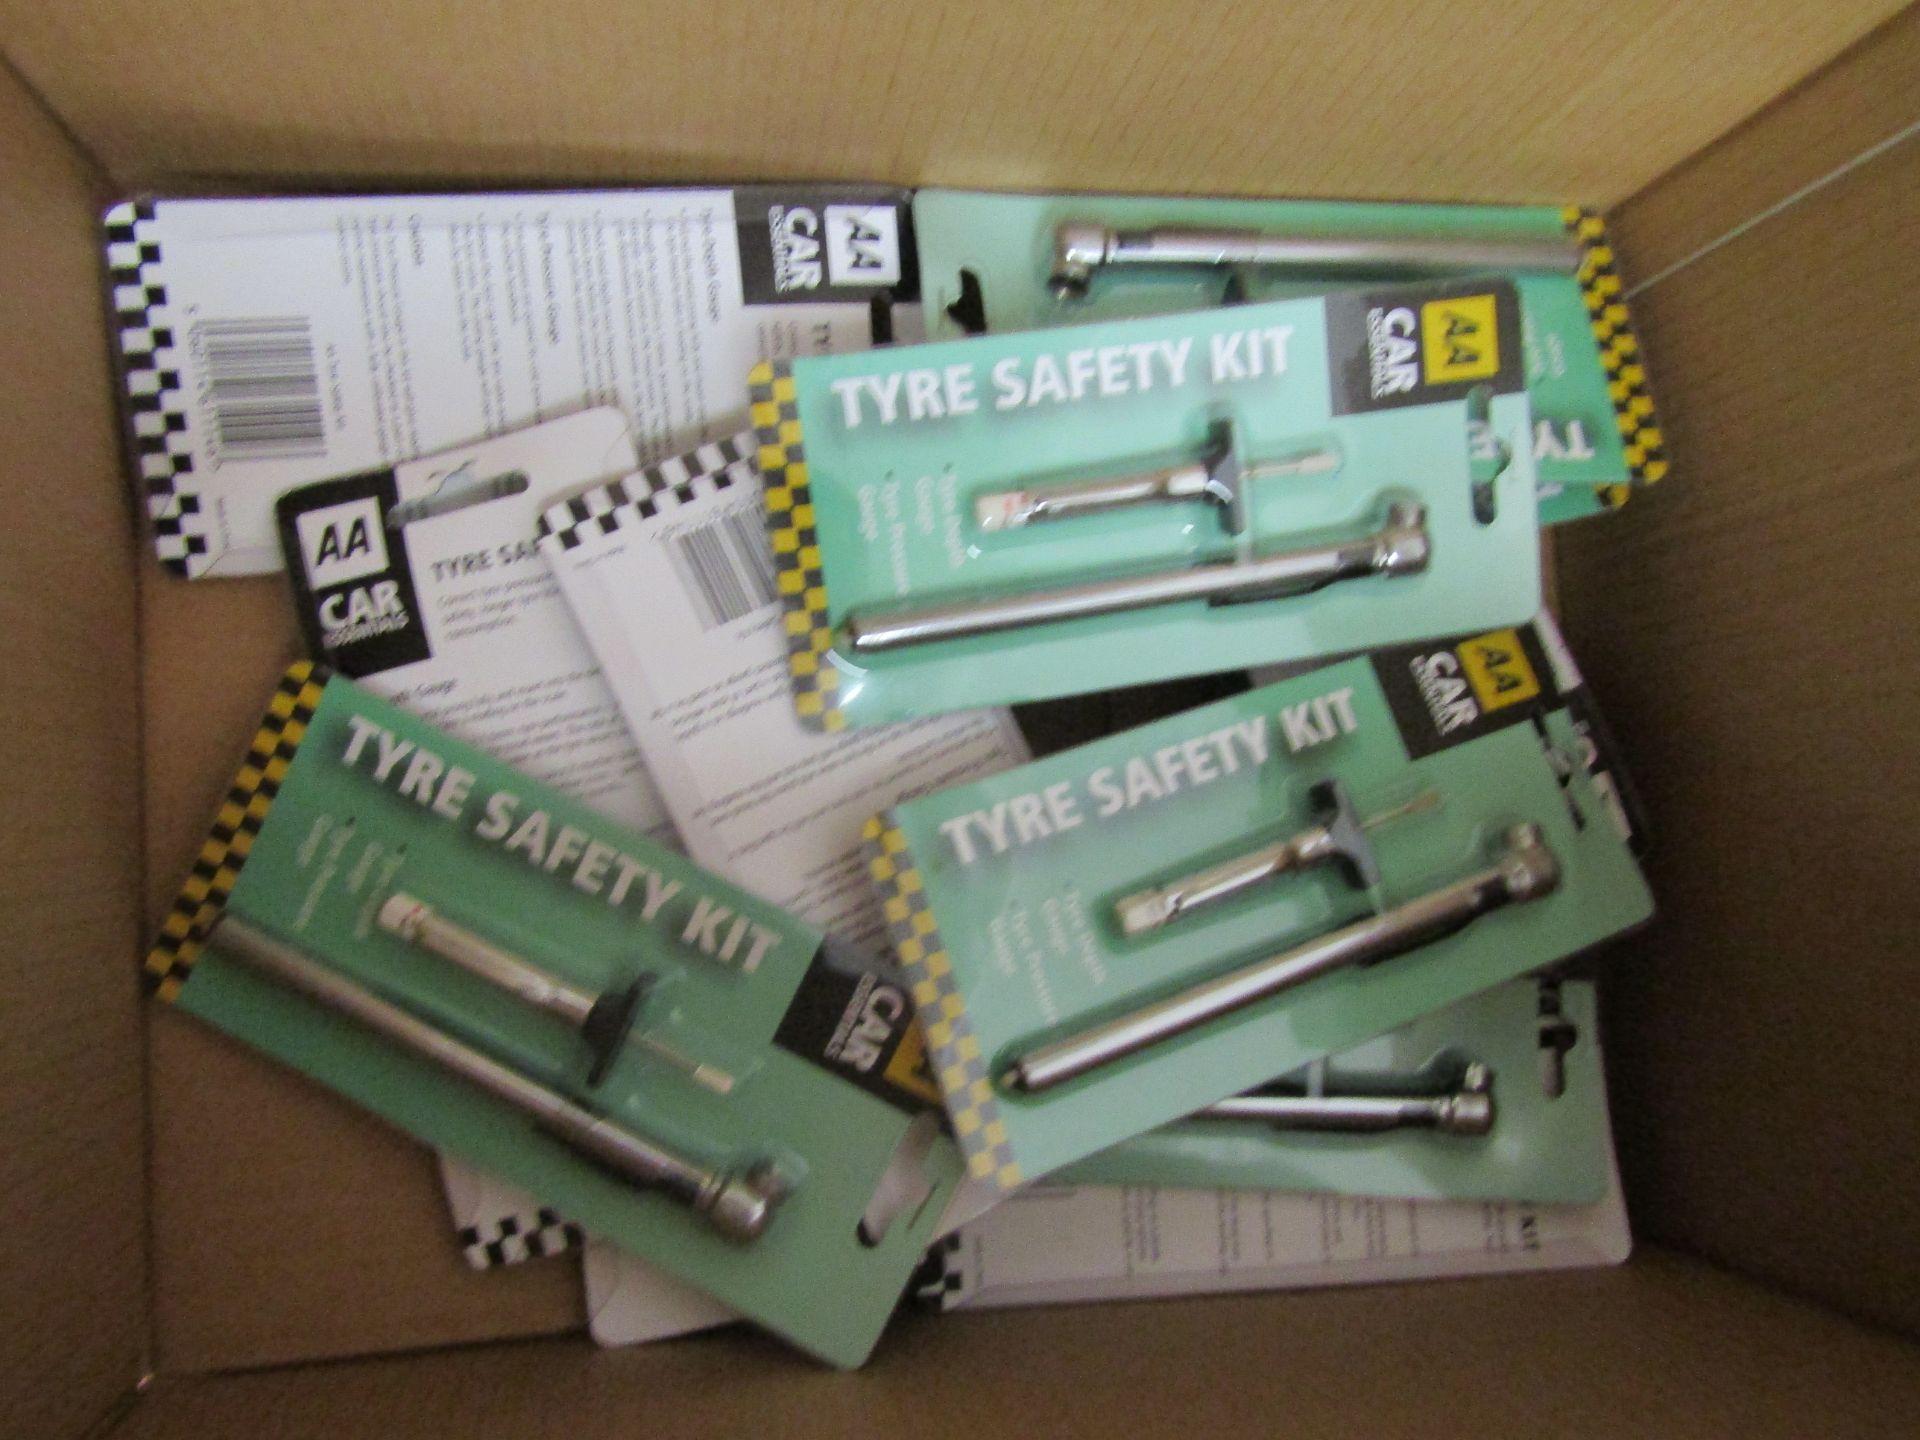 Box containing Approx 13 AA Car Essentials Tyre Safety Kits. All New In Packaging.